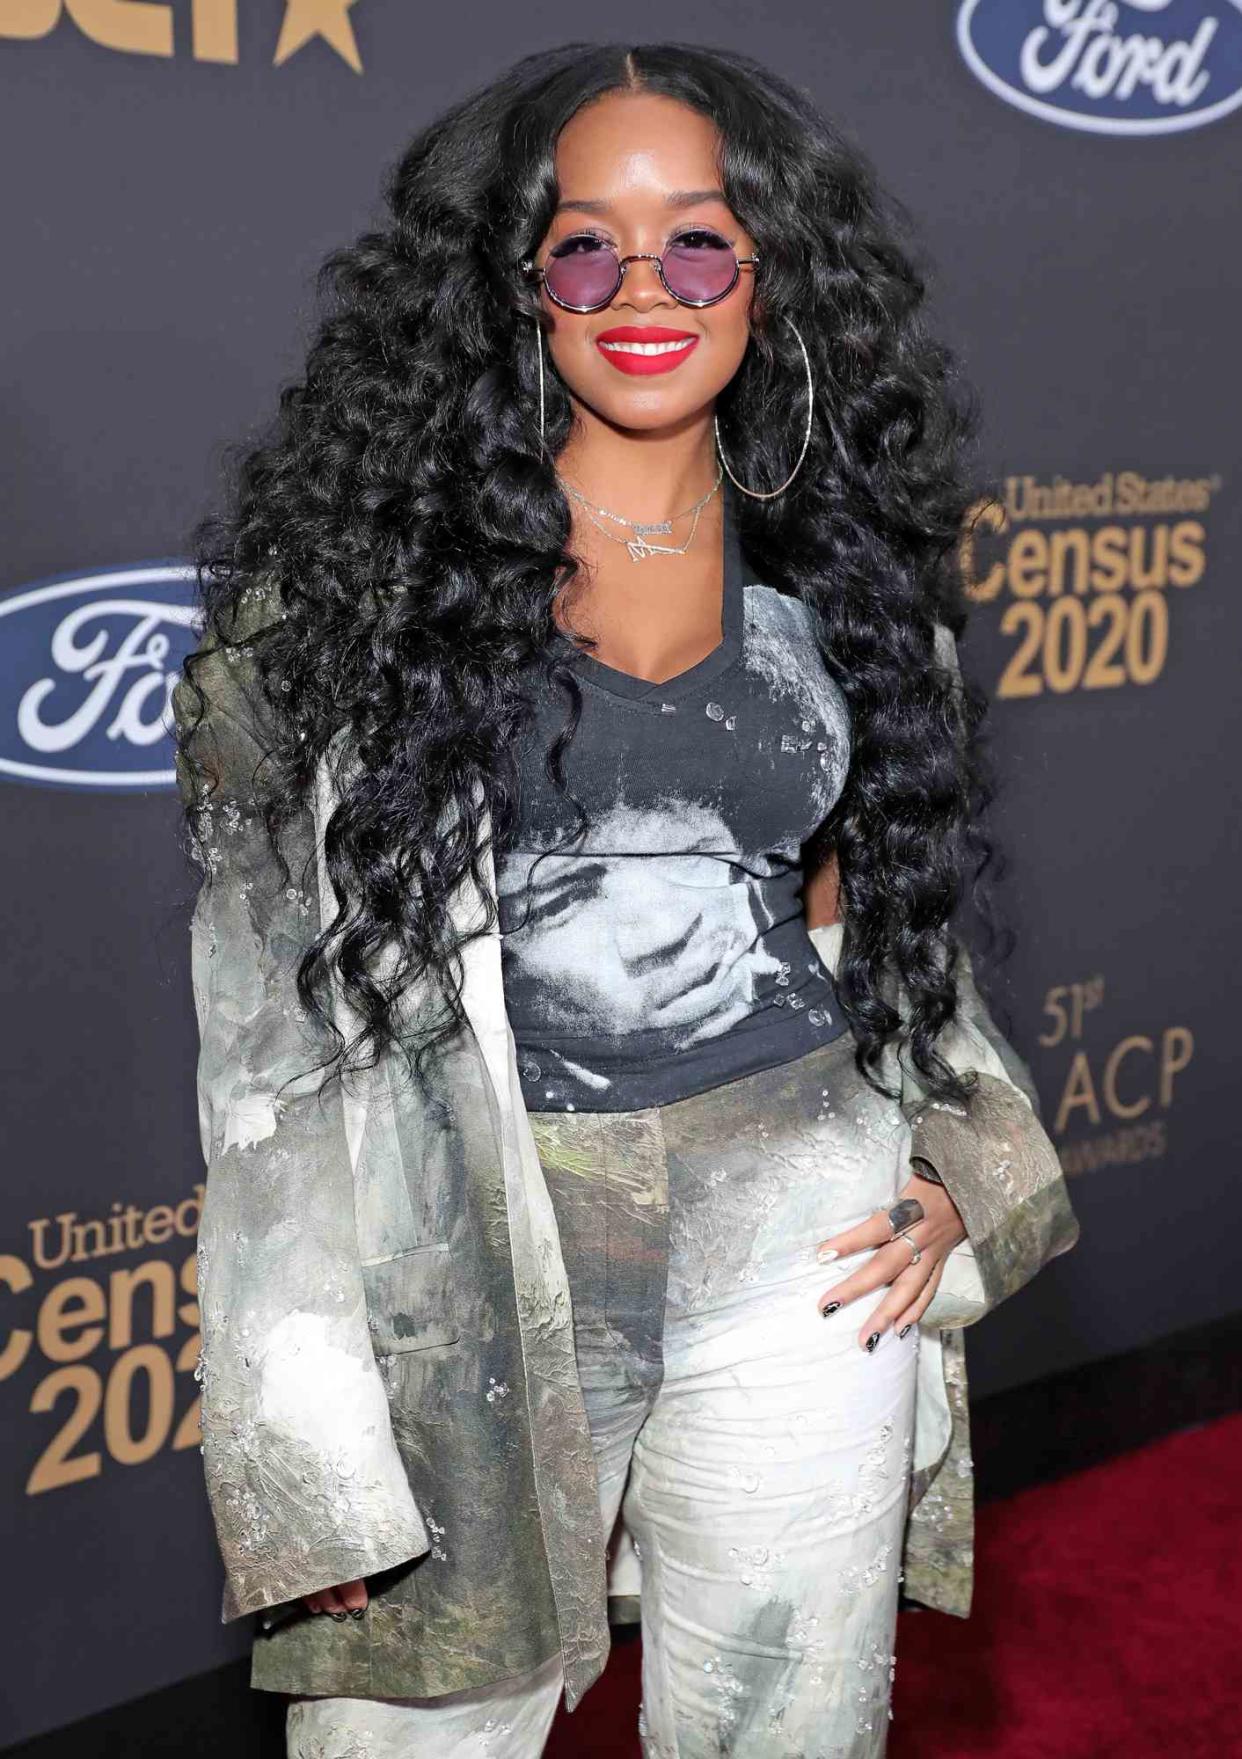 H.E.R. attends the 51st NAACP Image Awards, Presented by BET, at Pasadena Civic Auditorium on February 22, 2020 in